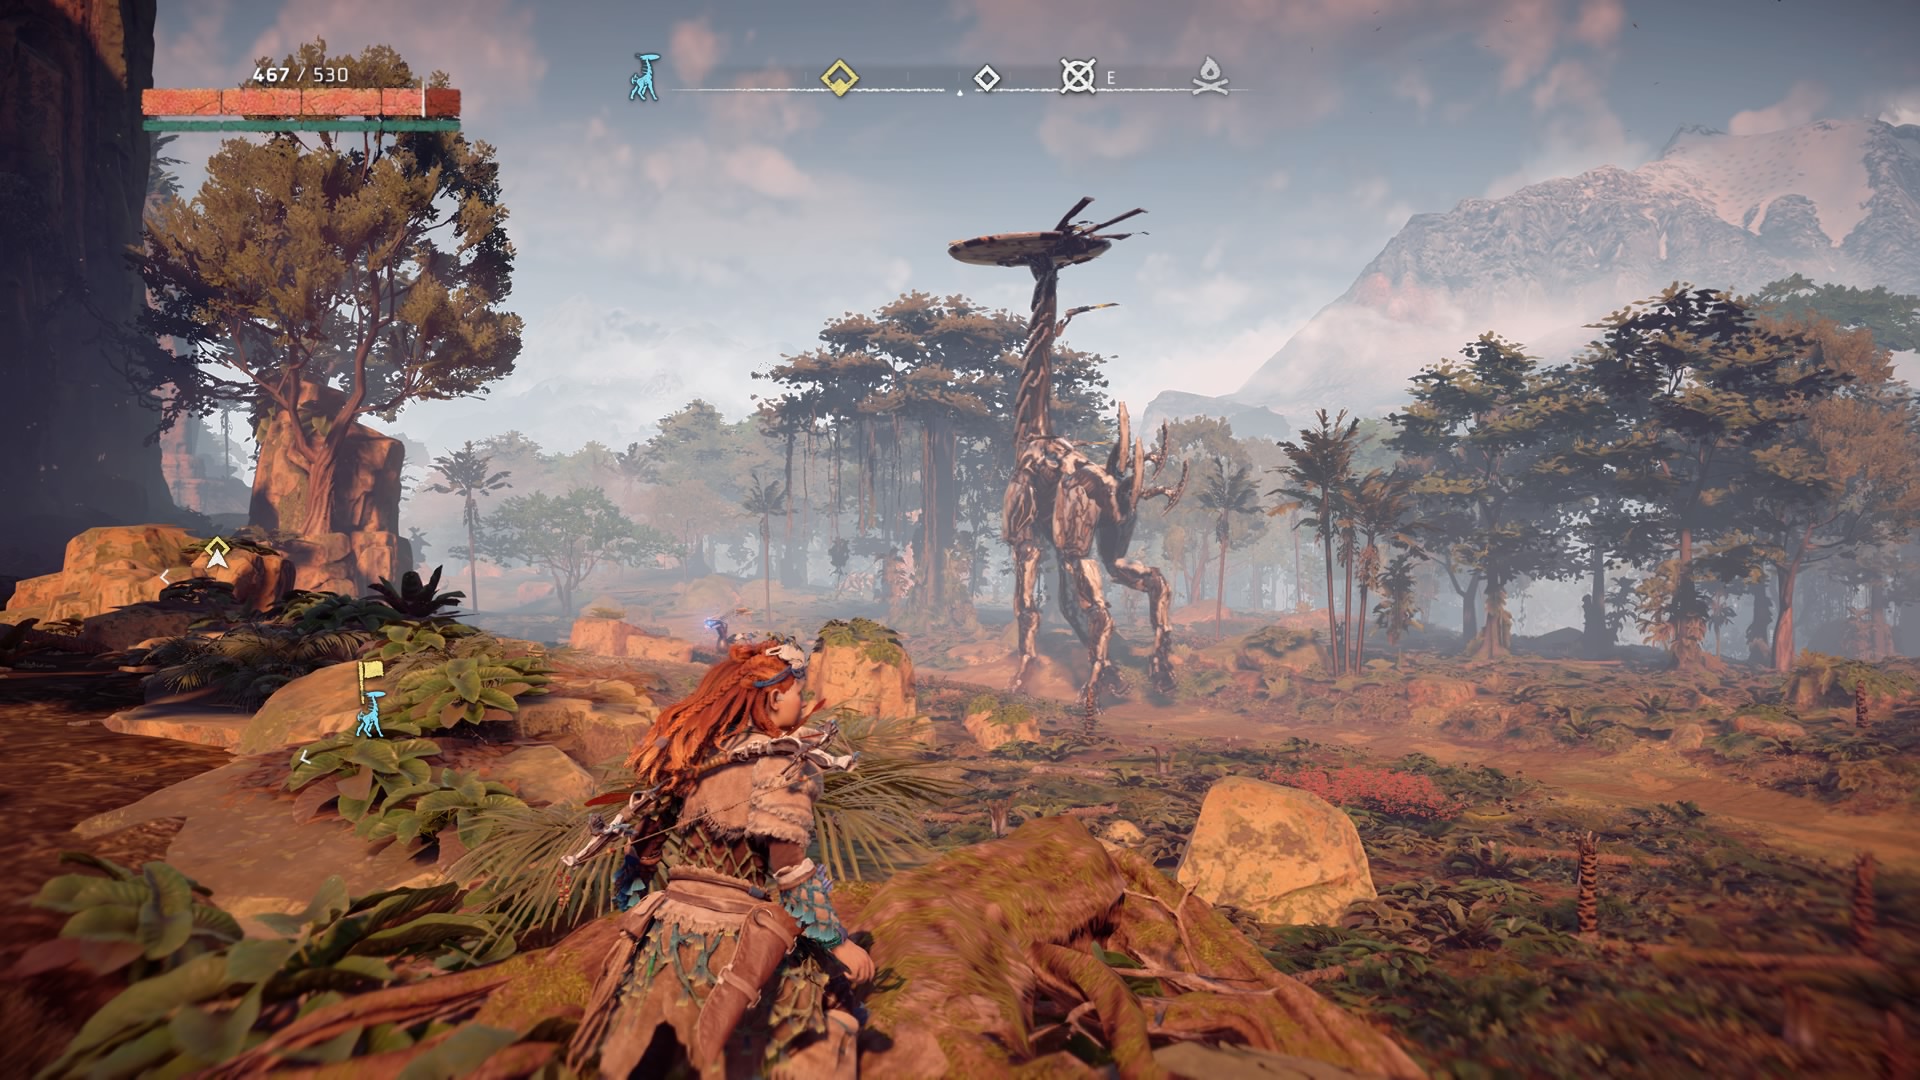 Horizon Zero Dawn review: One of the most beautiful games ever